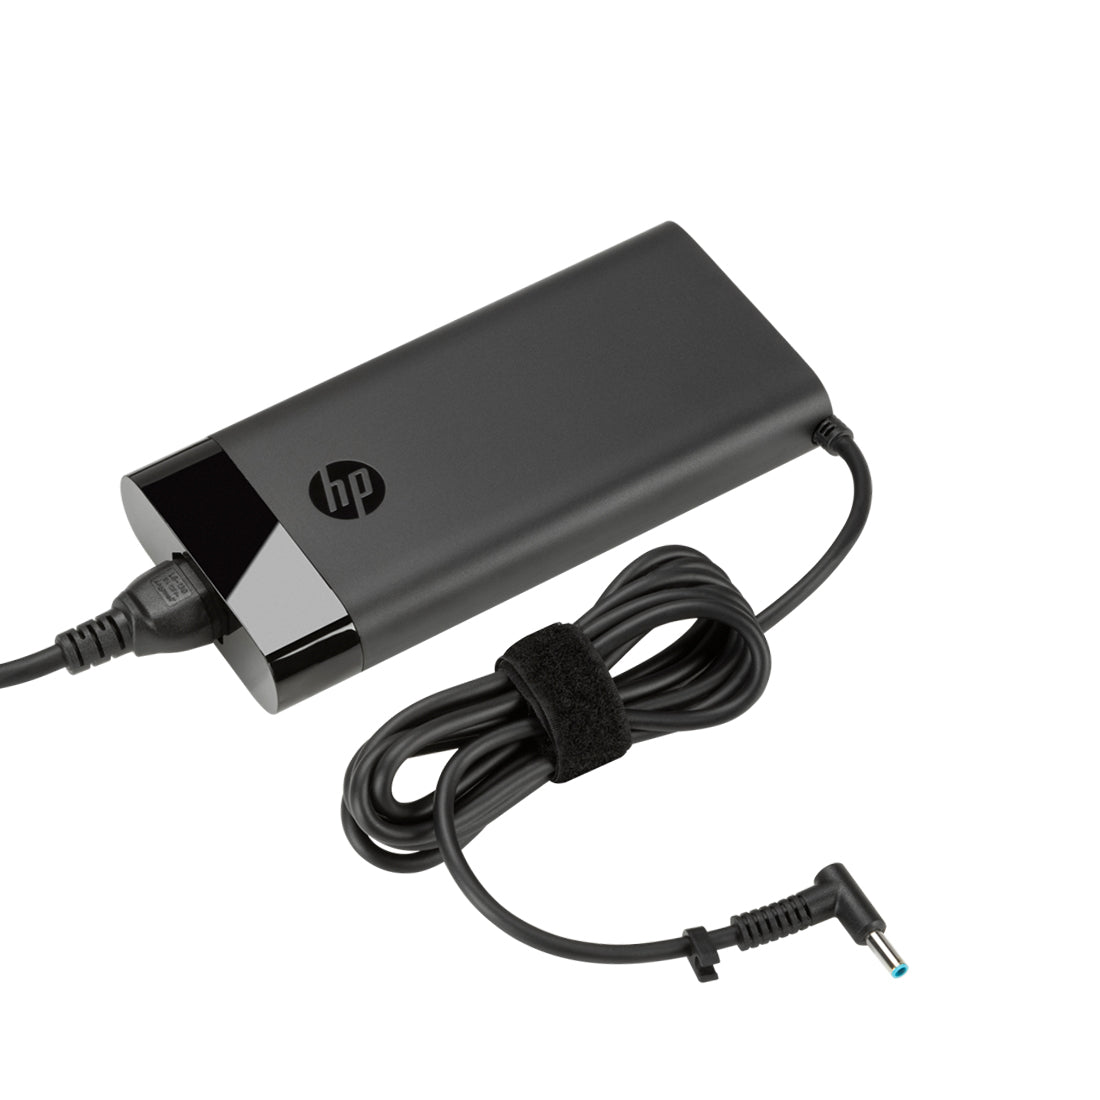 HP Original 200W 4.5mm Pin Laptop Charger Adapter (No Power Cable)